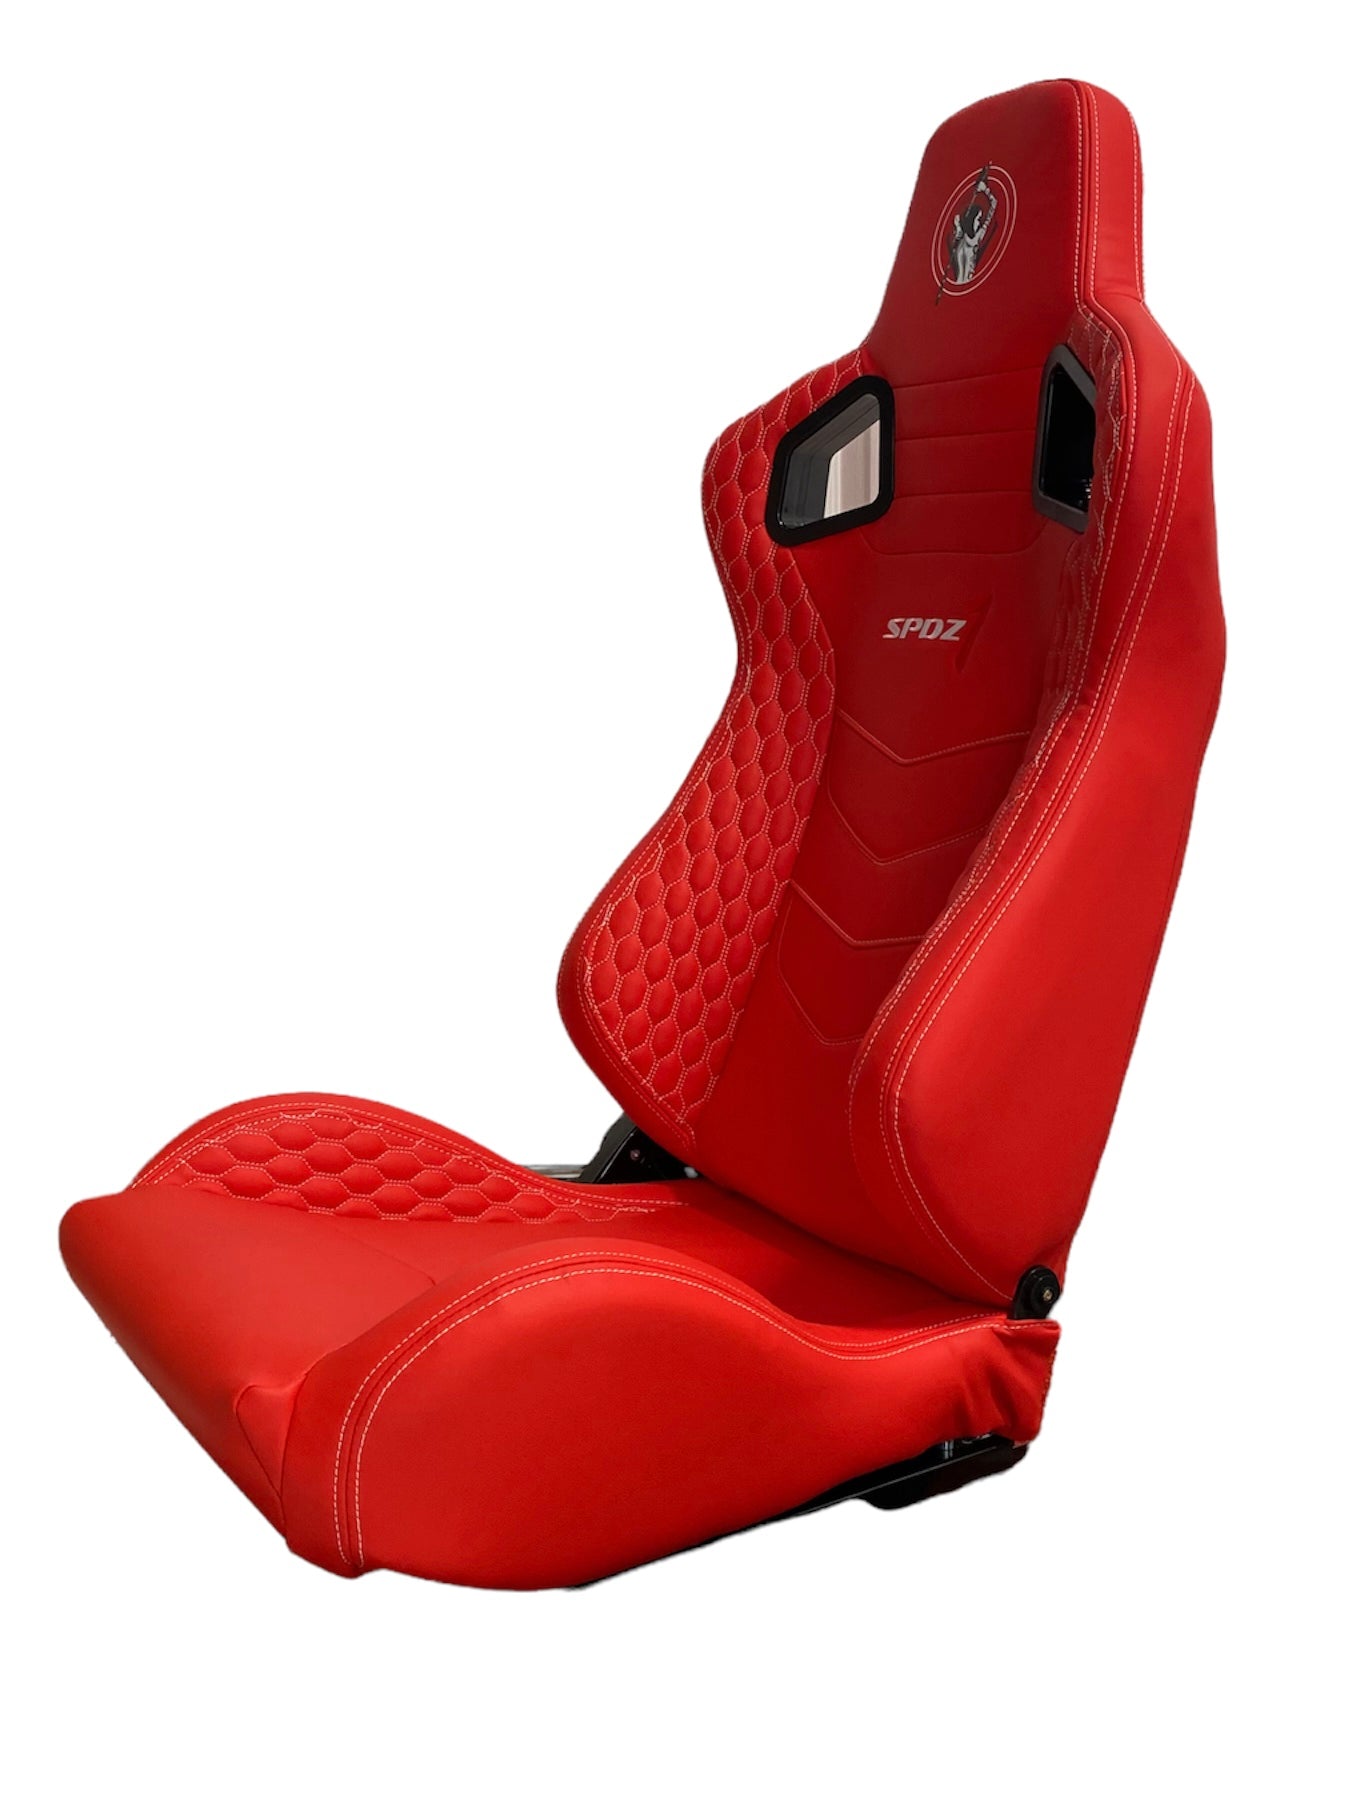 Sparco EVO Family of Racing Seats at Competition Motorsport –